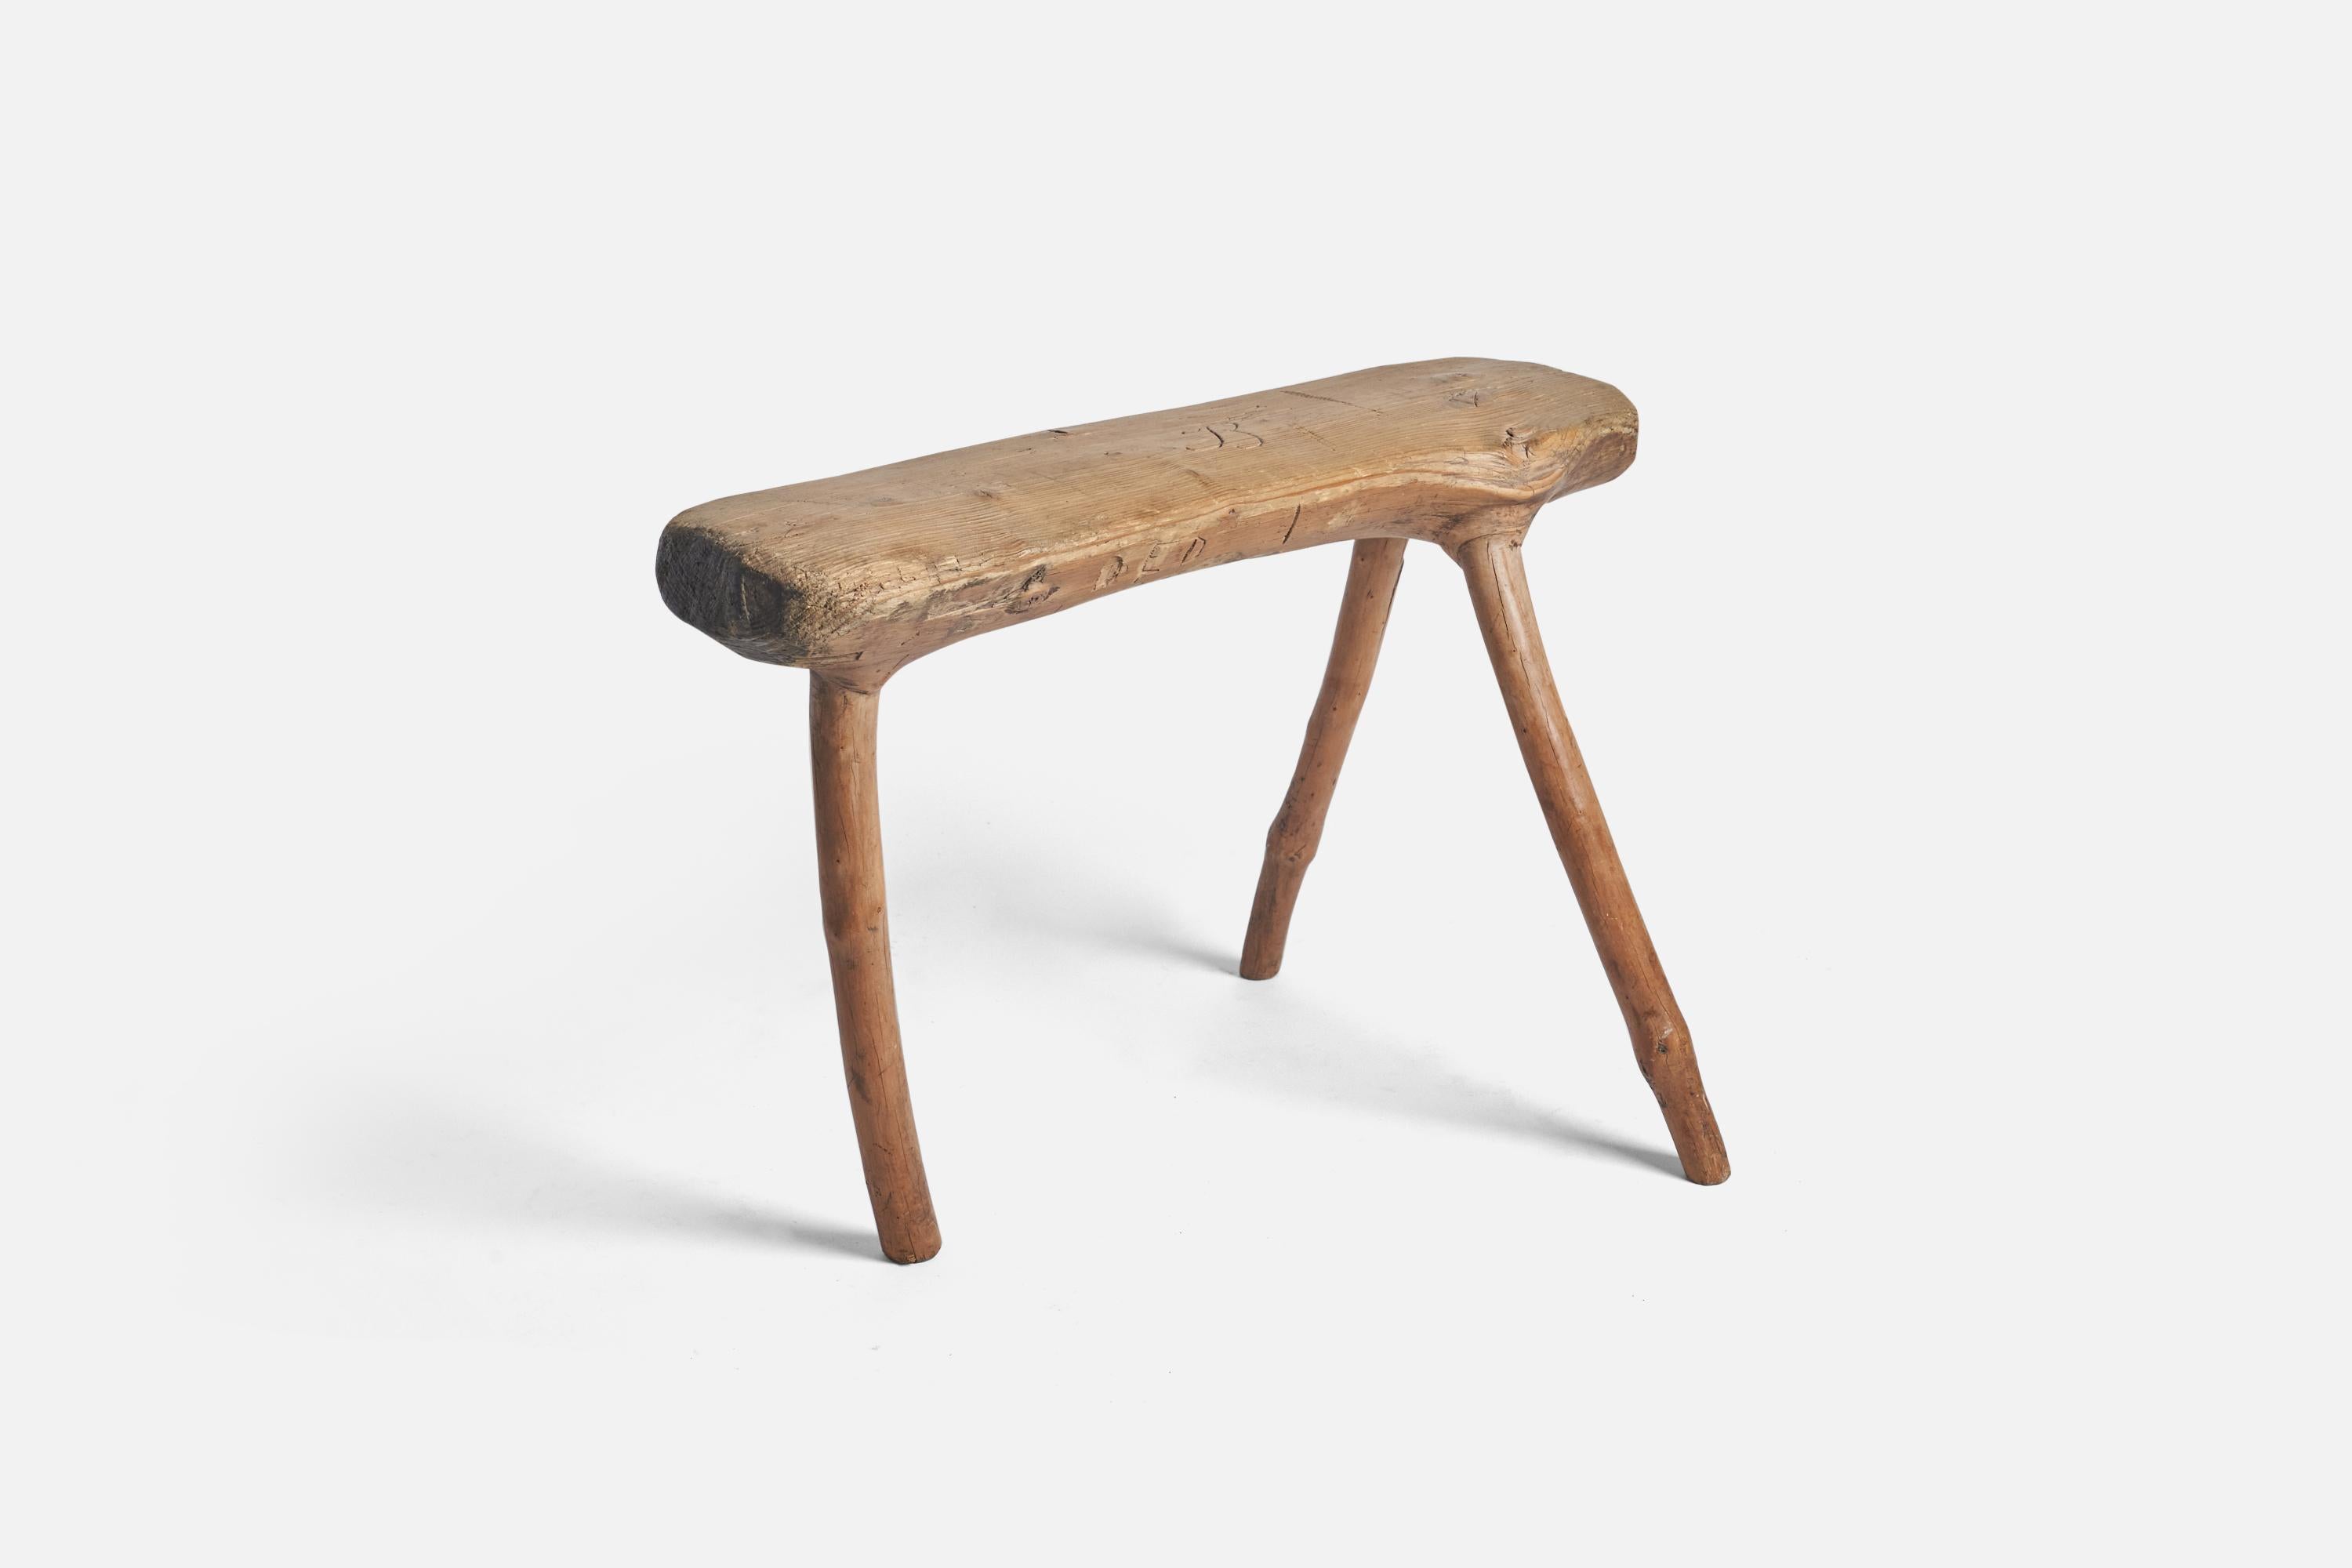 A farmers wooden stool produced in Sweden, 19th century. Signed 